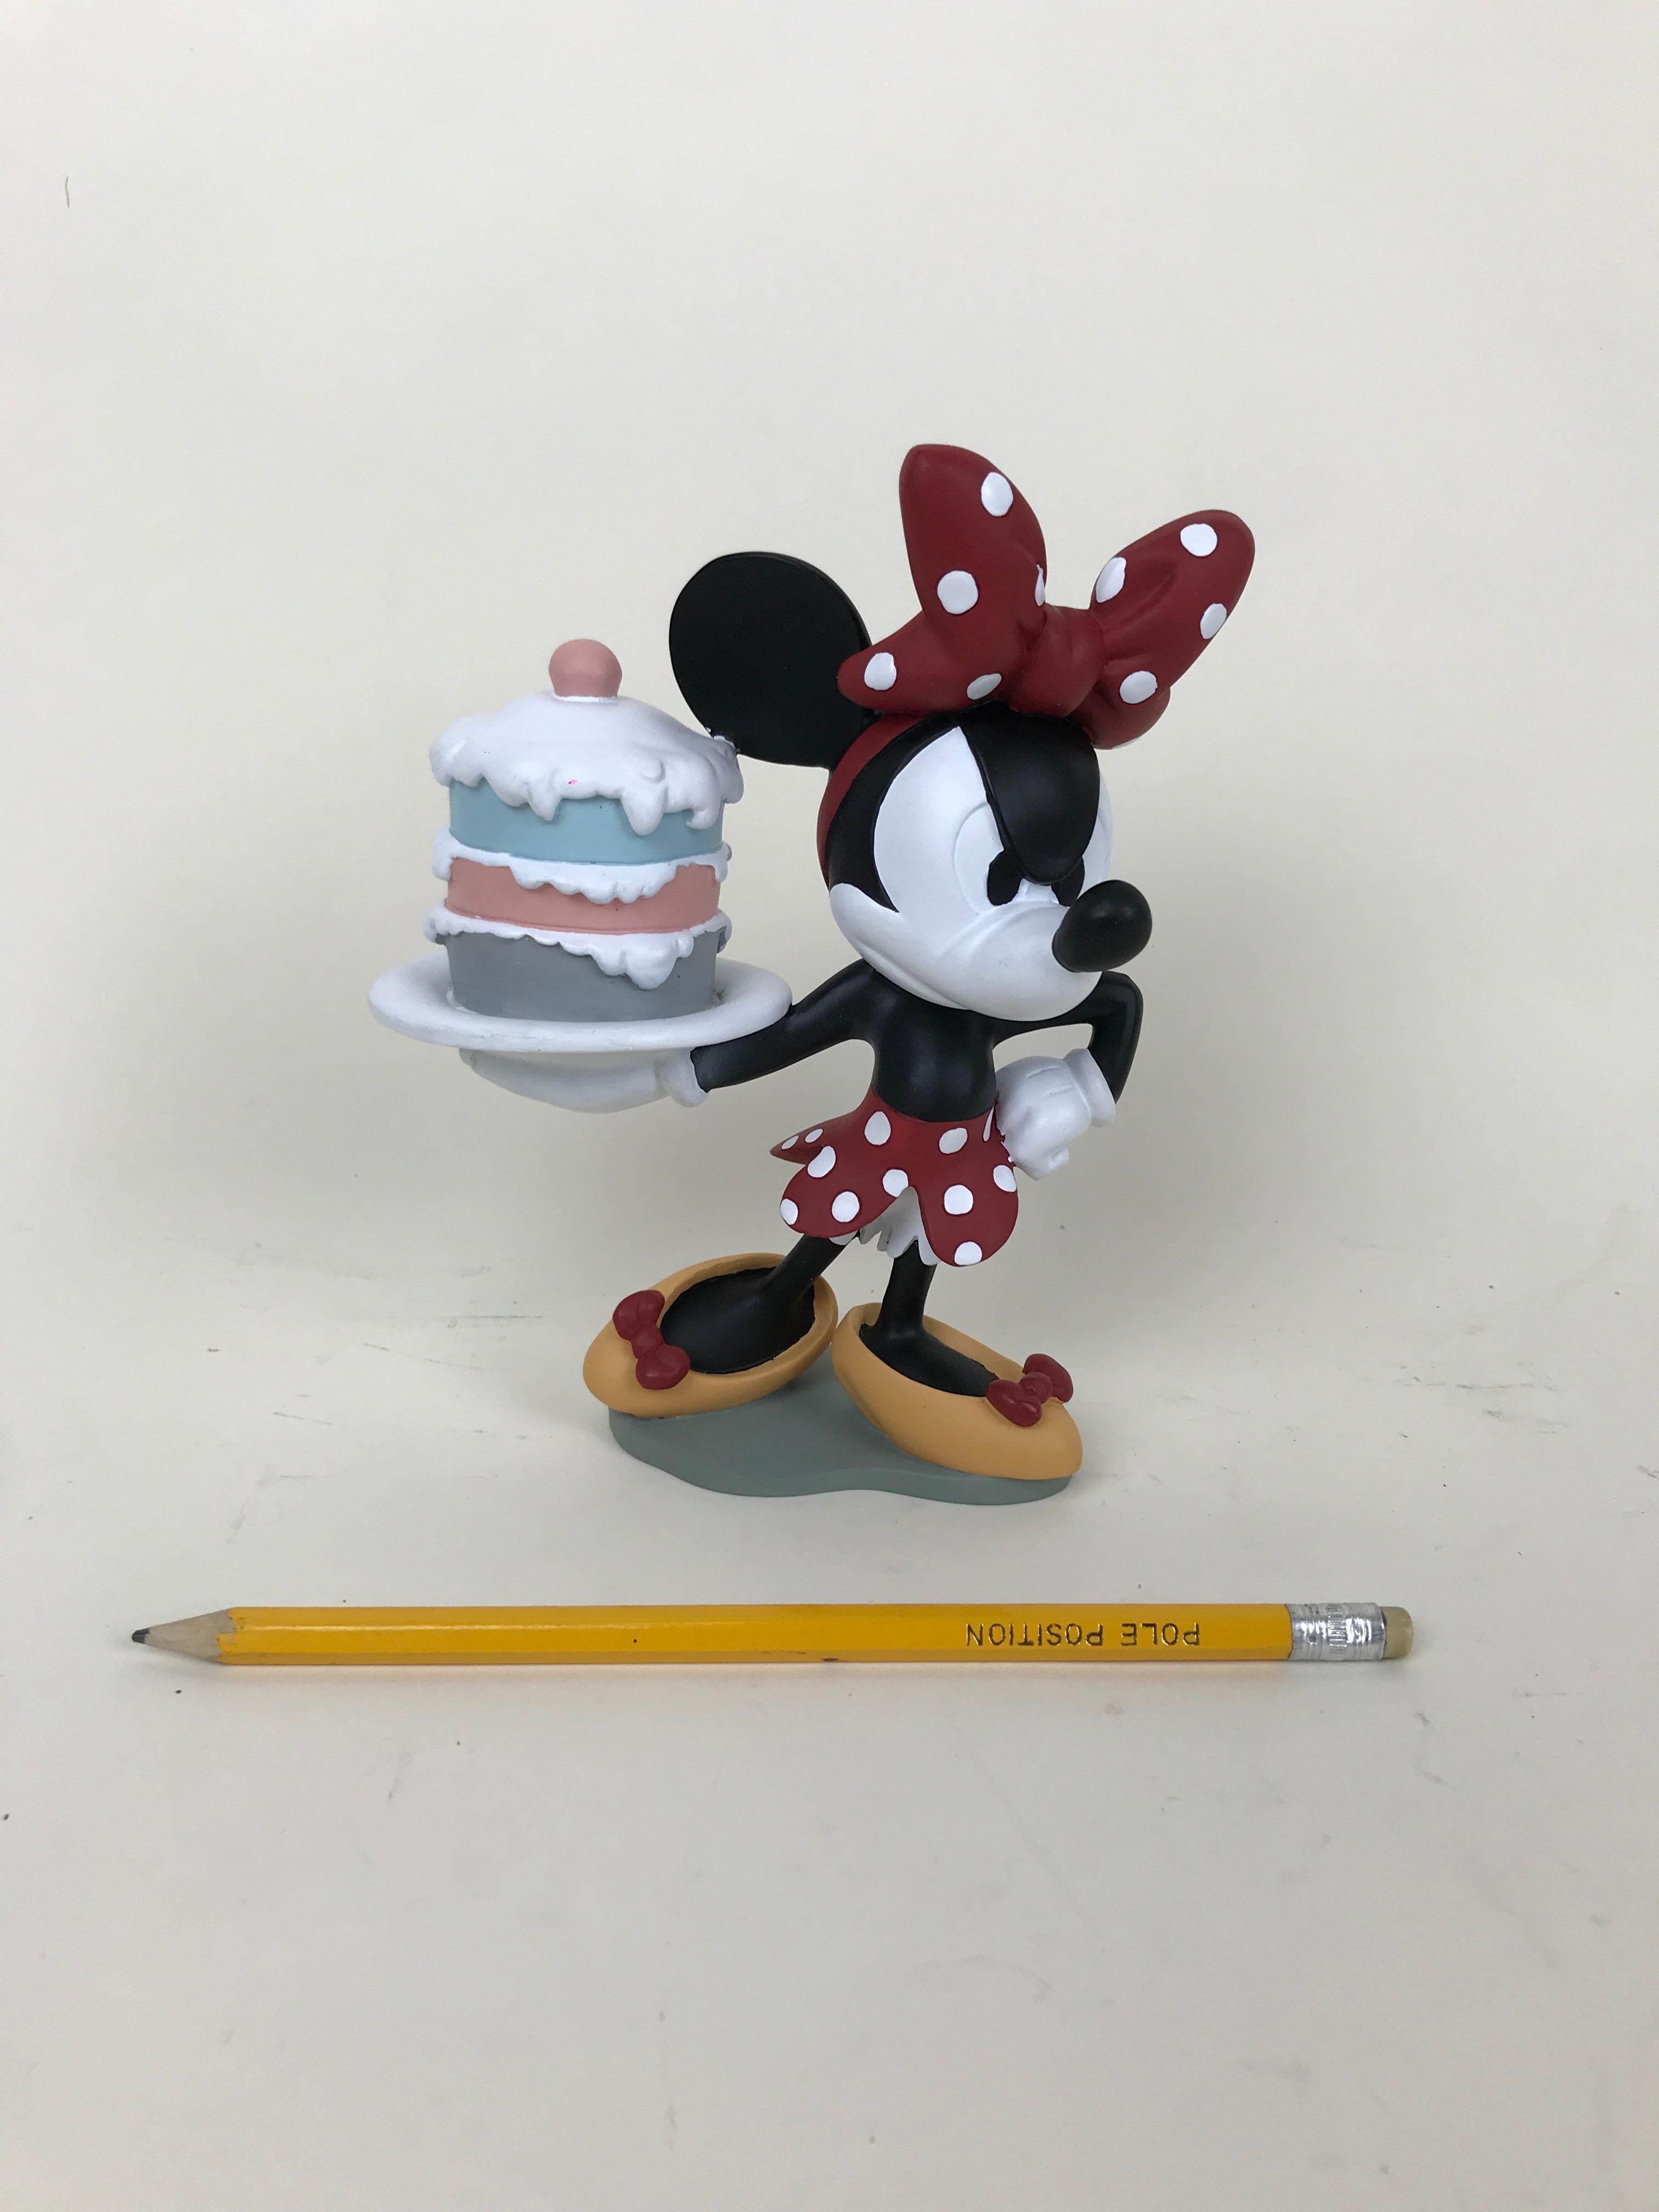 Rare Walt Disney Minnie Mouse Angry statue by French company Demons & Merveilles for Walt Disney realized in resin in the 1990s.

The statue doesn't have the original box.